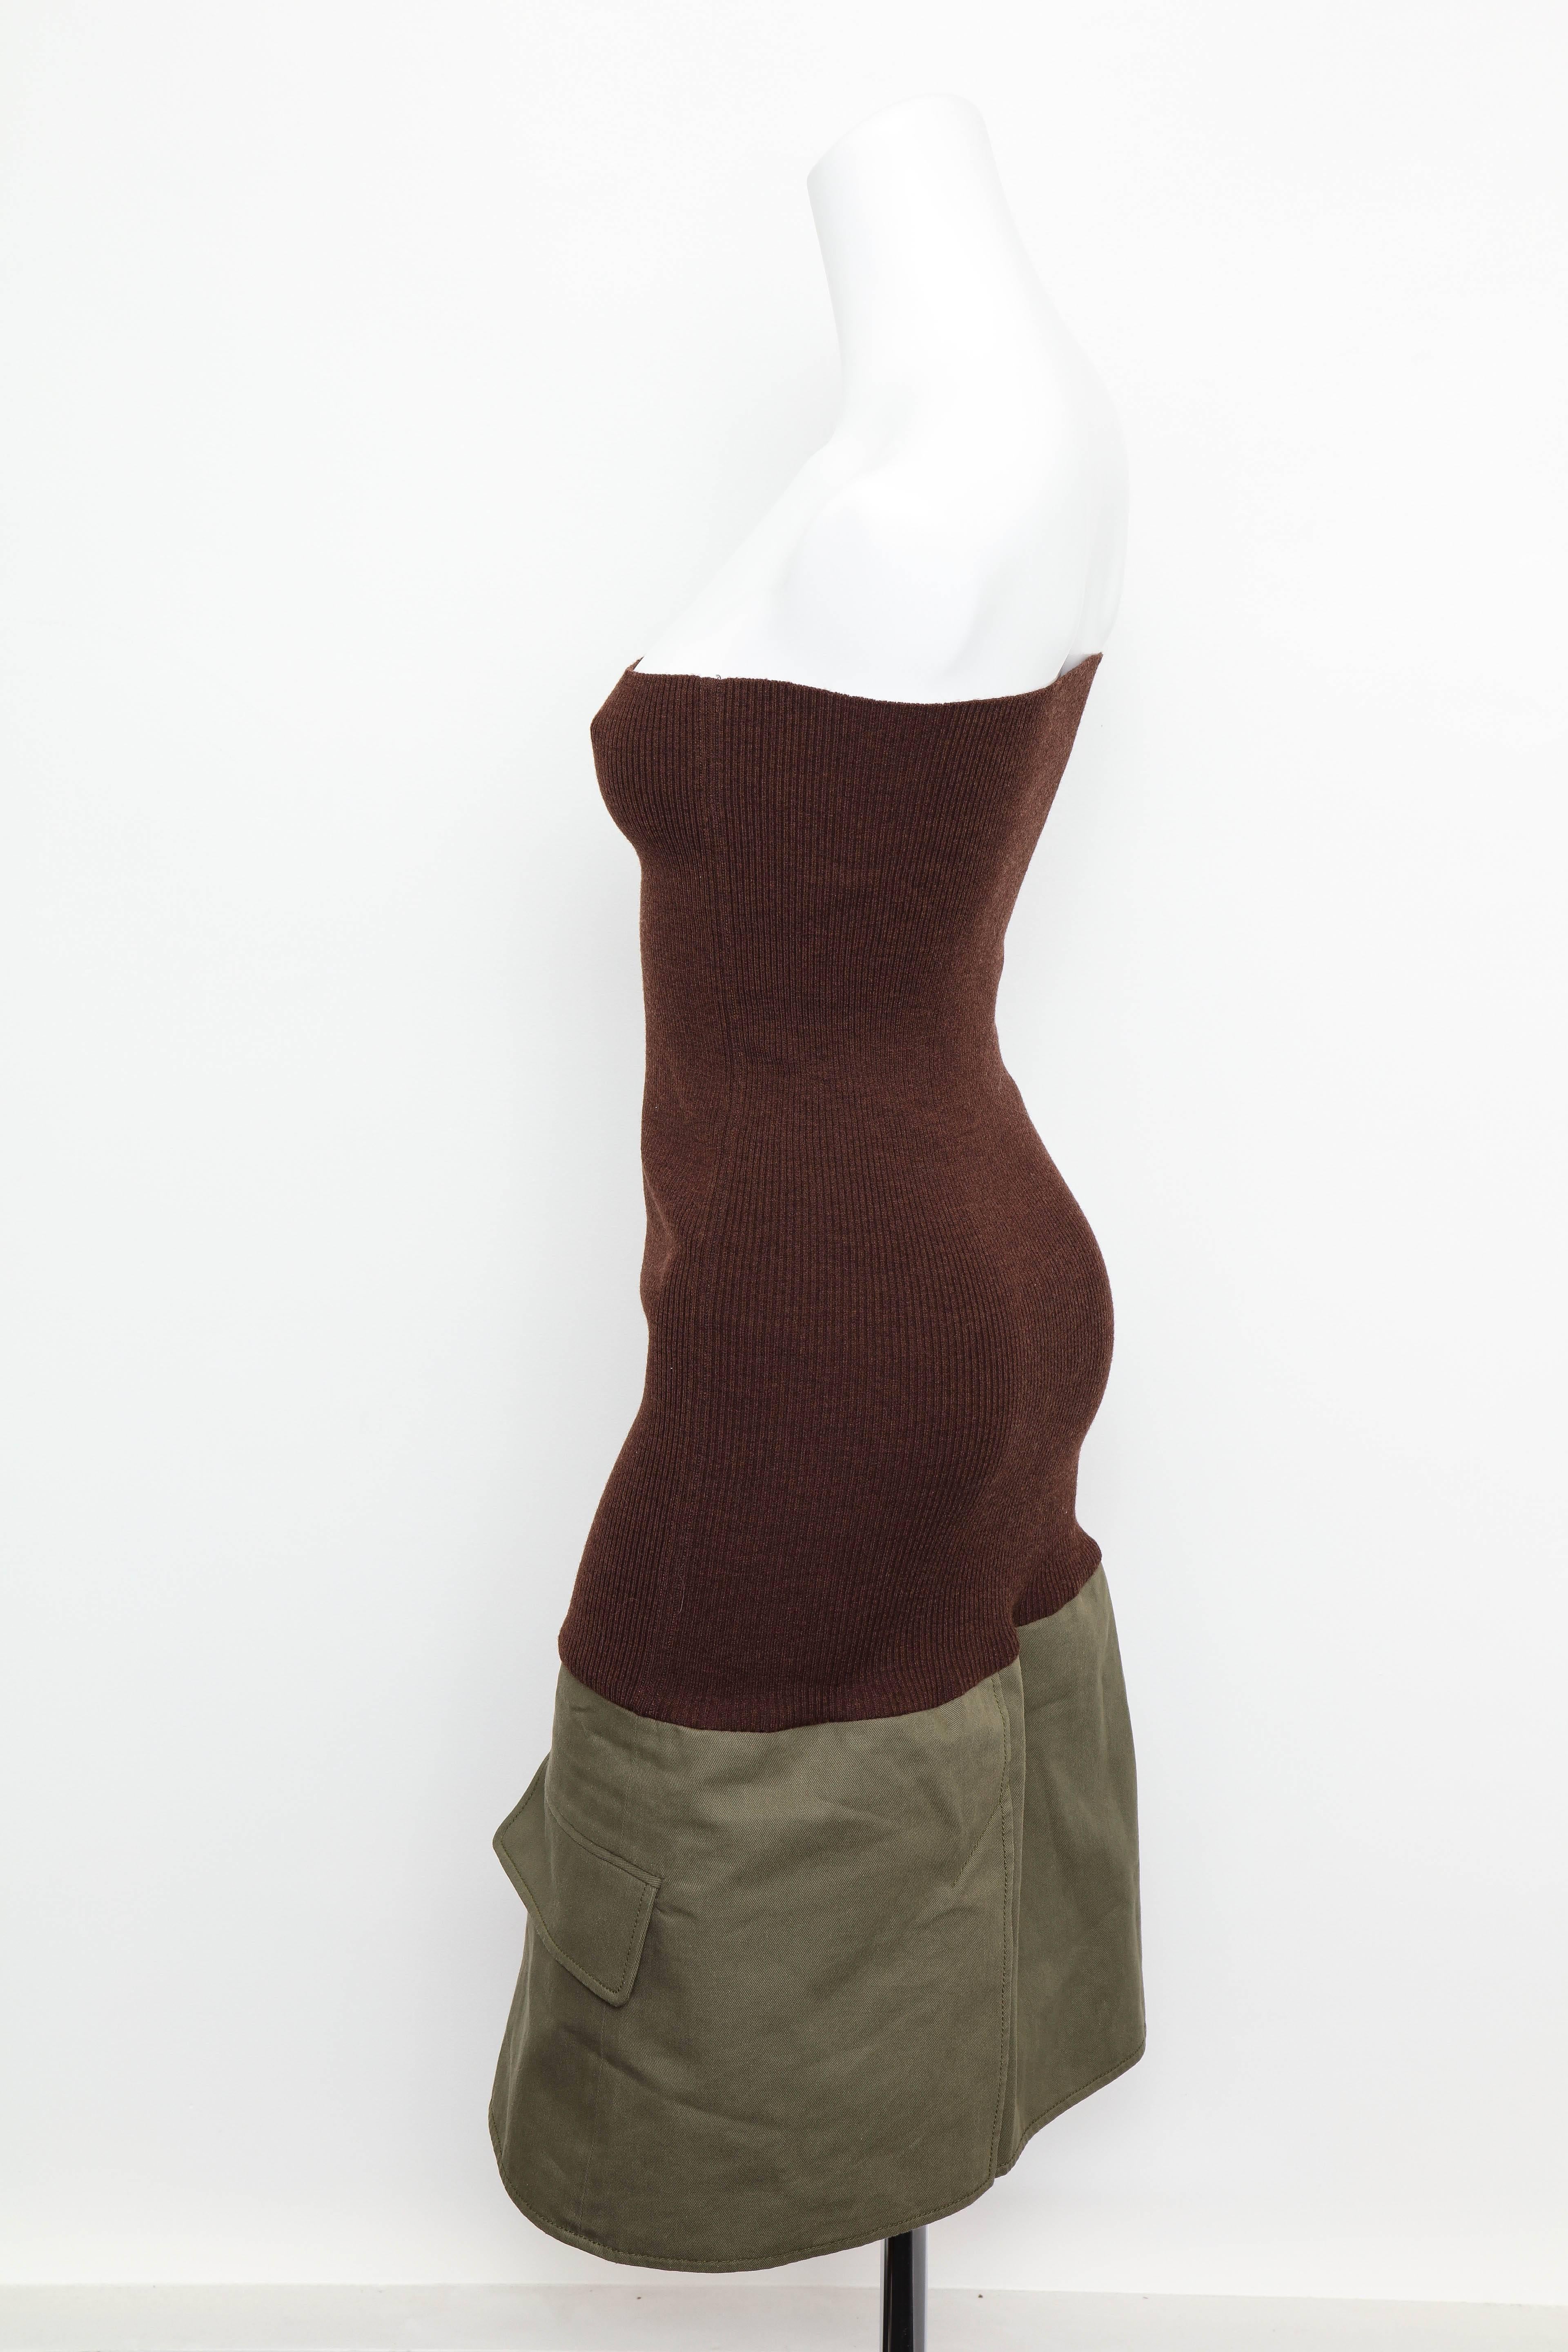 Women's Christian Dior by John Galliano Knit Tube Dress For Sale